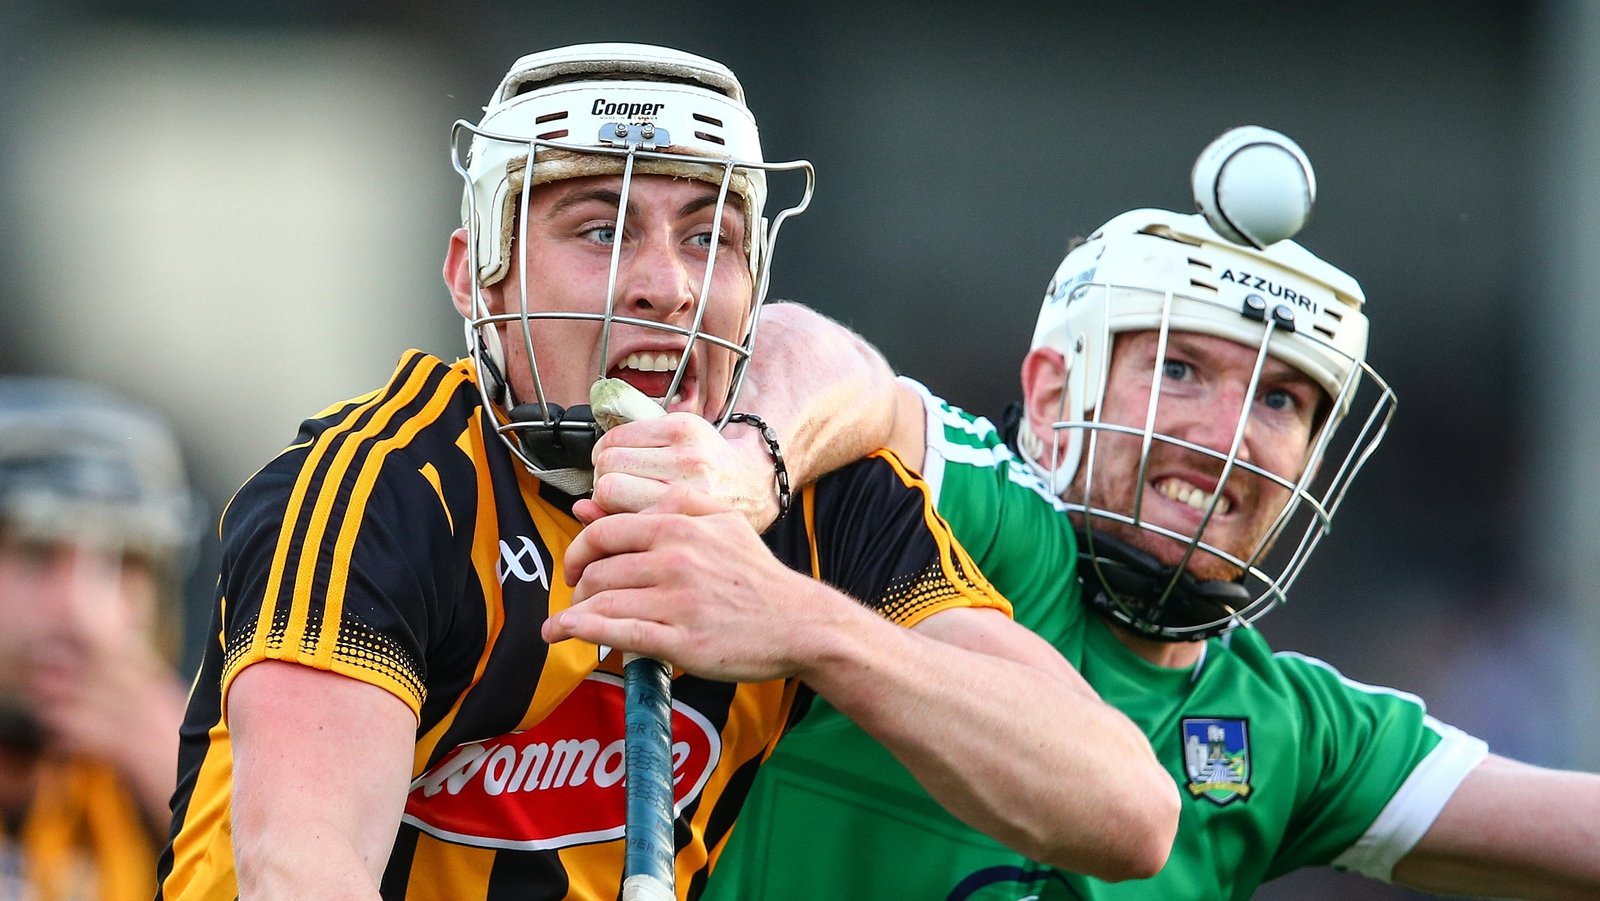 All you need to know about Kilkenny v Limerick